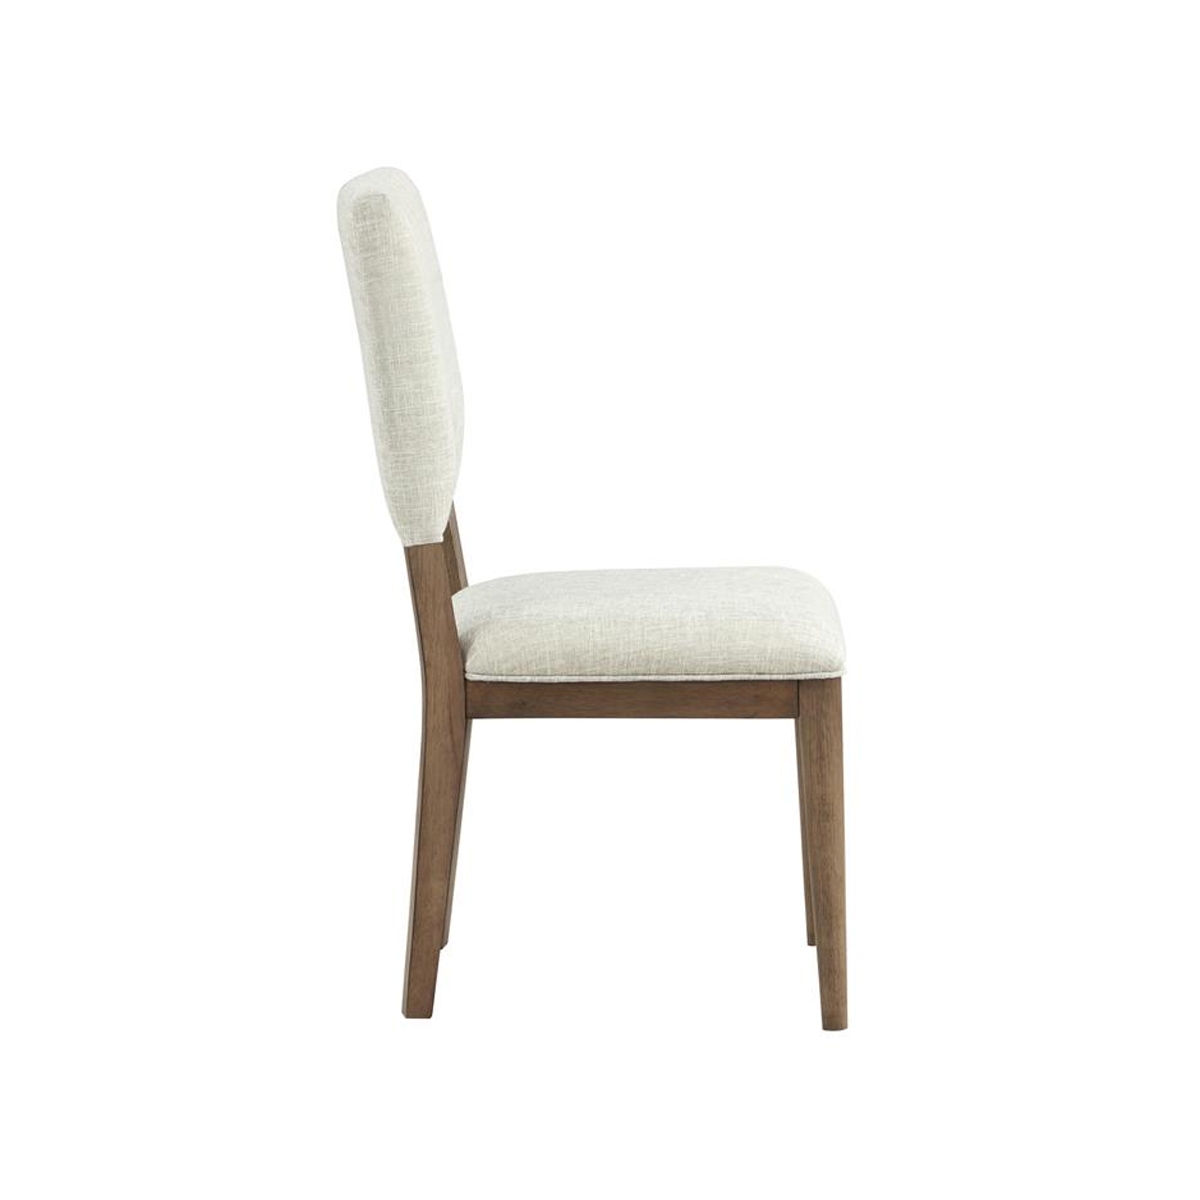 Picture of UPHOLSTERED DINING CHAIR